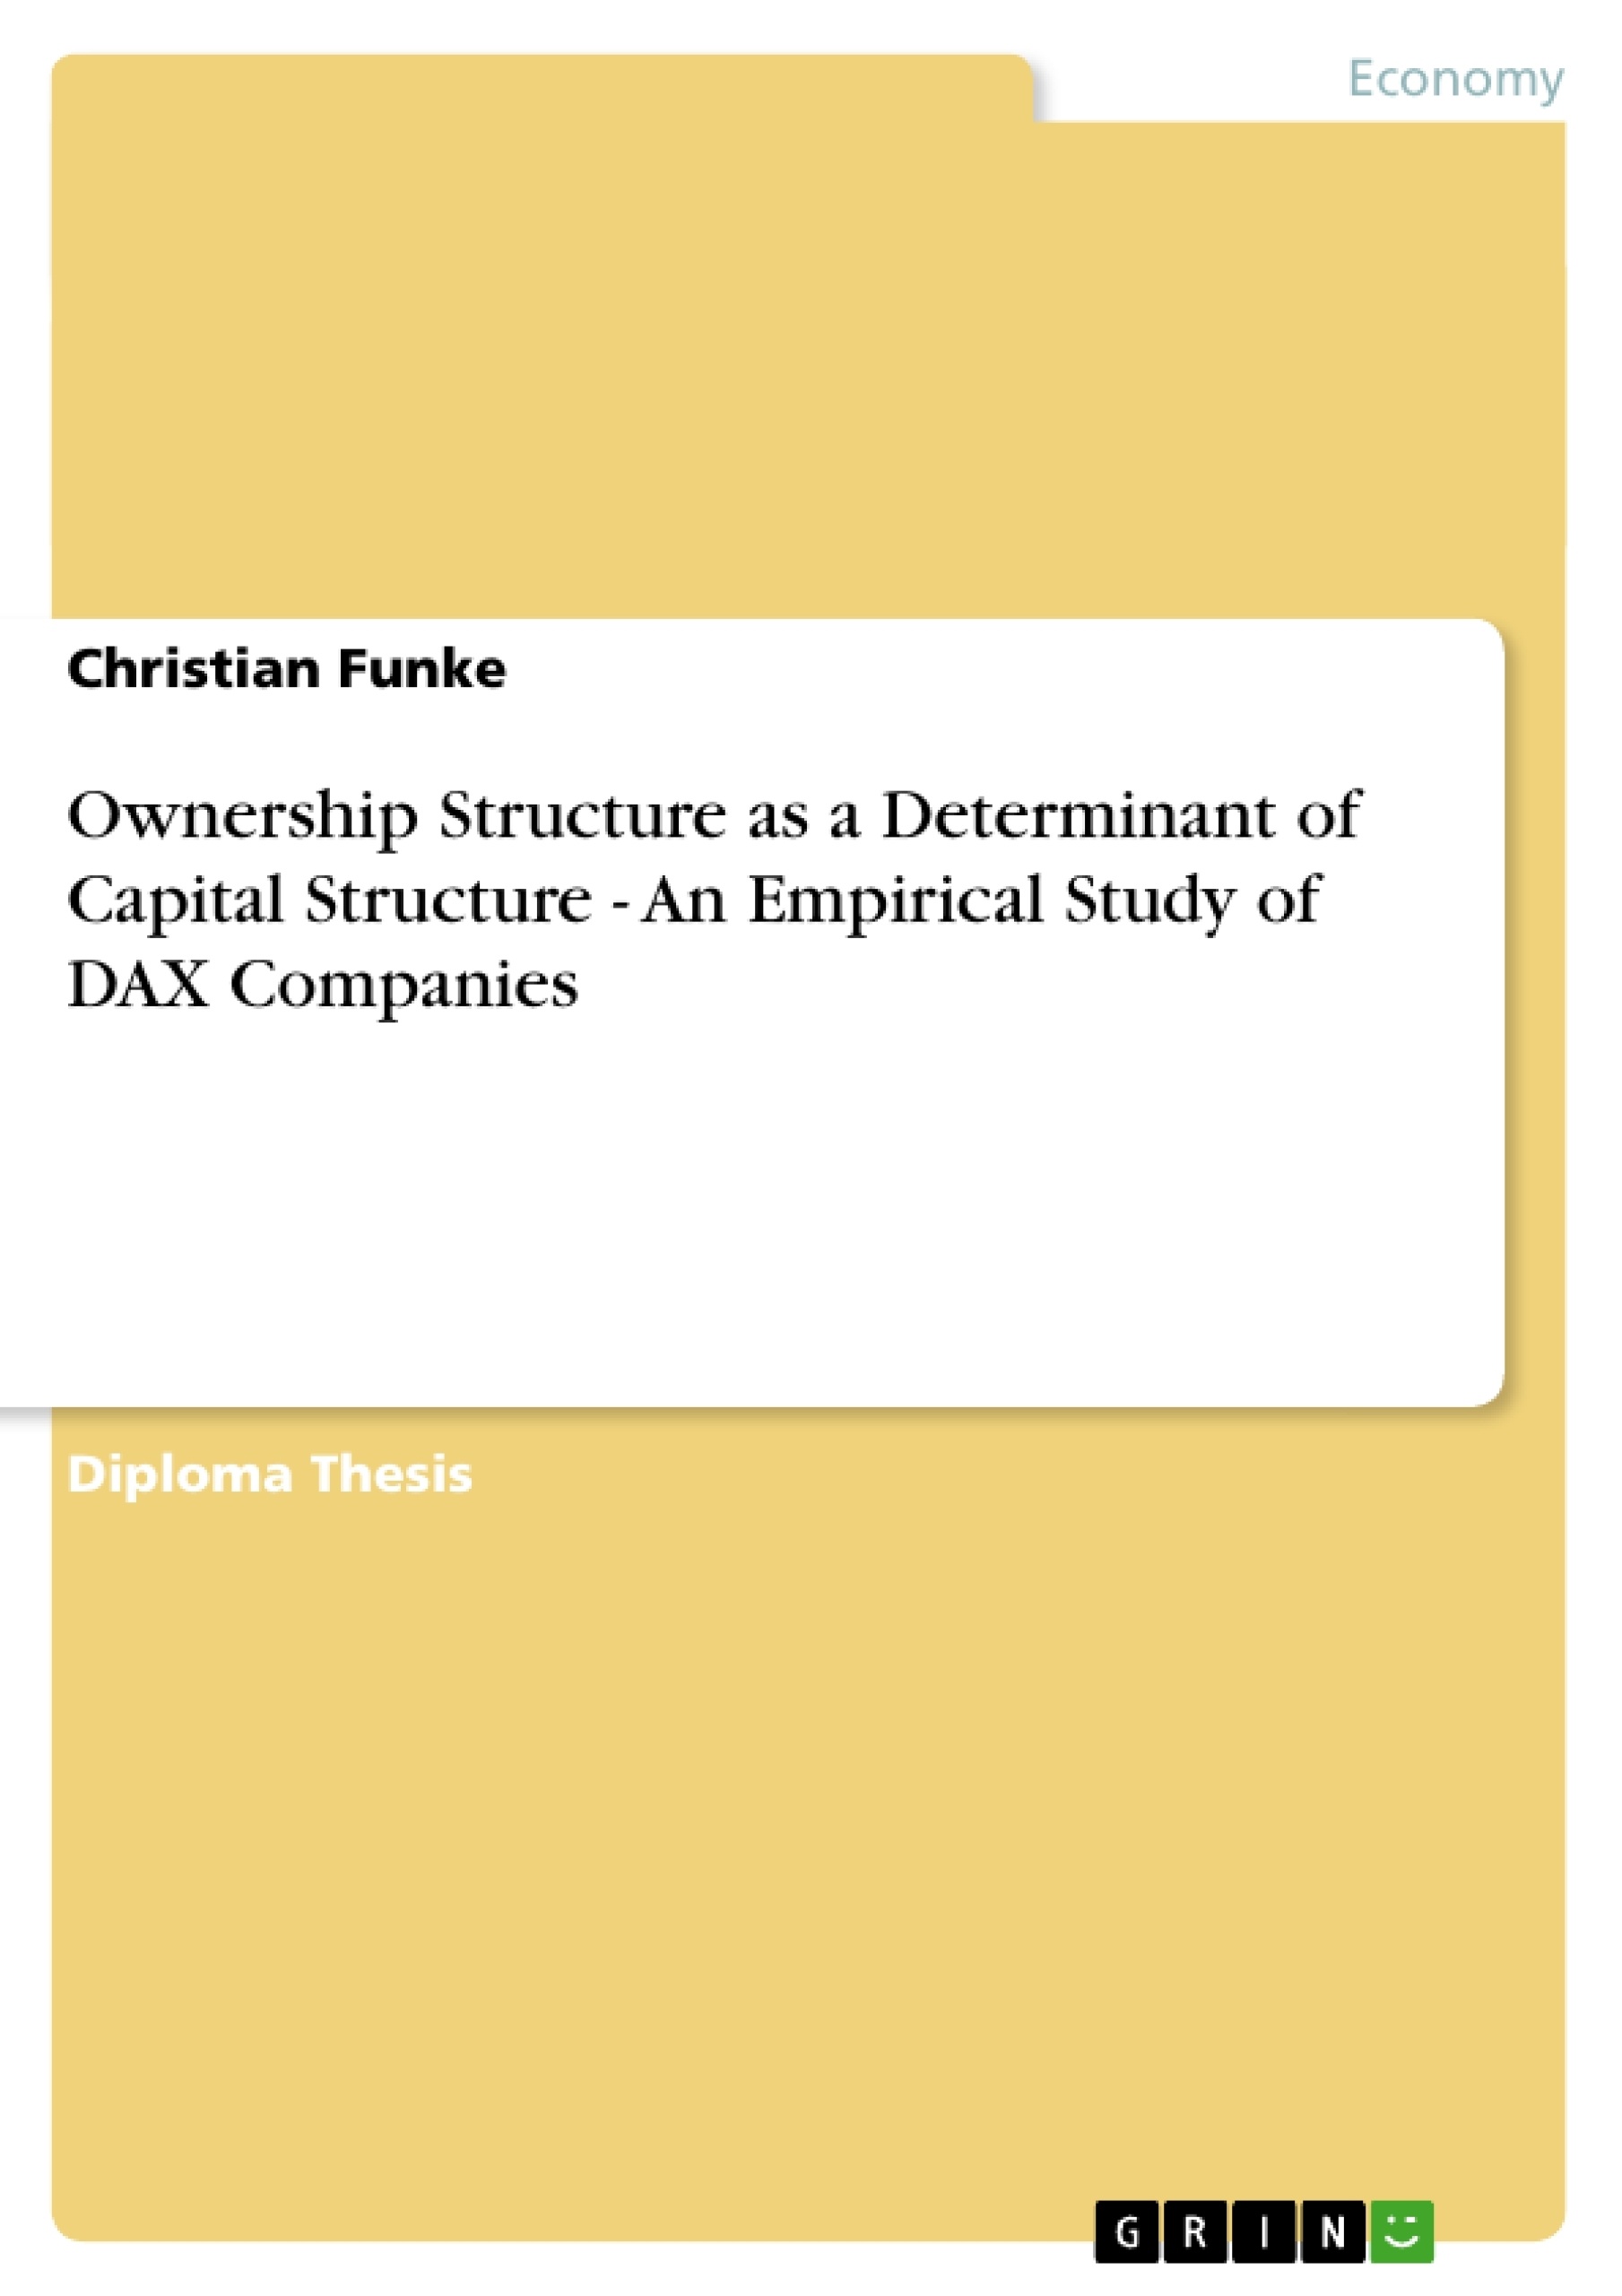 Titre: Ownership Structure as a Determinant of Capital Structure - An Empirical Study of DAX Companies